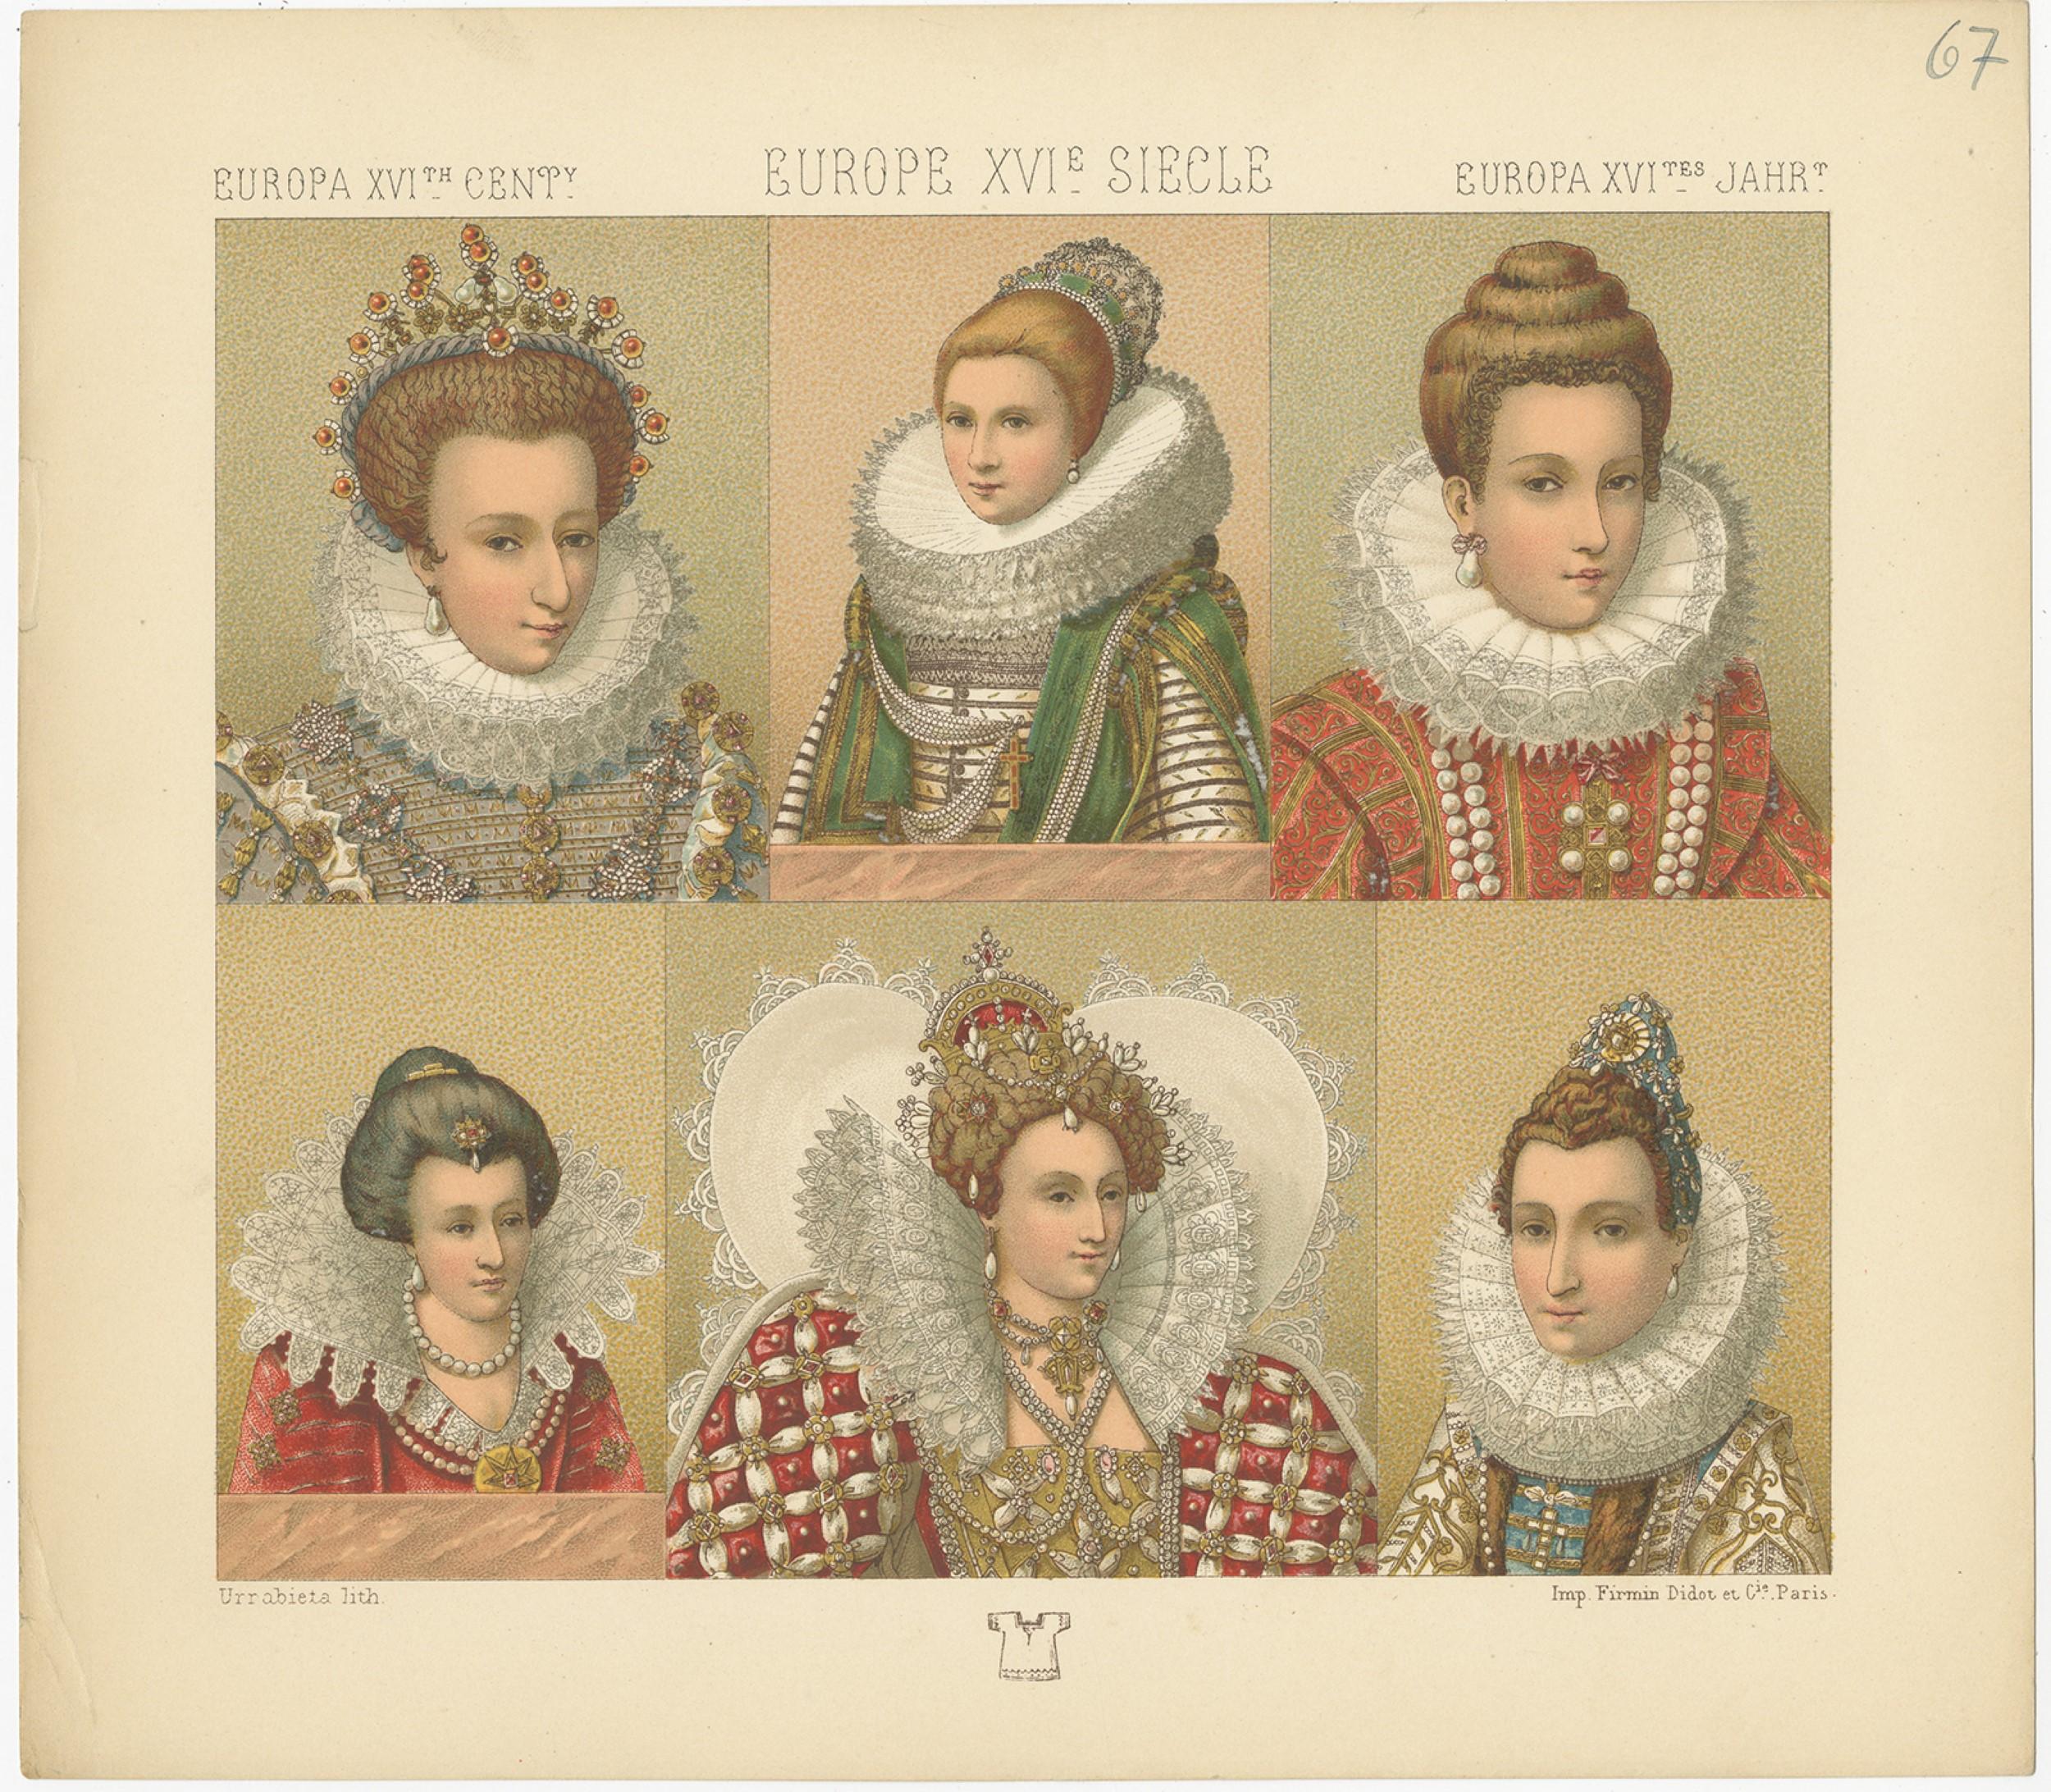 Antique print titled 'Europa XVI Cent - Europe XVIe Siecle - Europa XVItes Jahr'. Chromolithograph of European 16th century costumes. This print originates from 'Le Costume Historique' by M.A. Racinet. Published circa 1880.